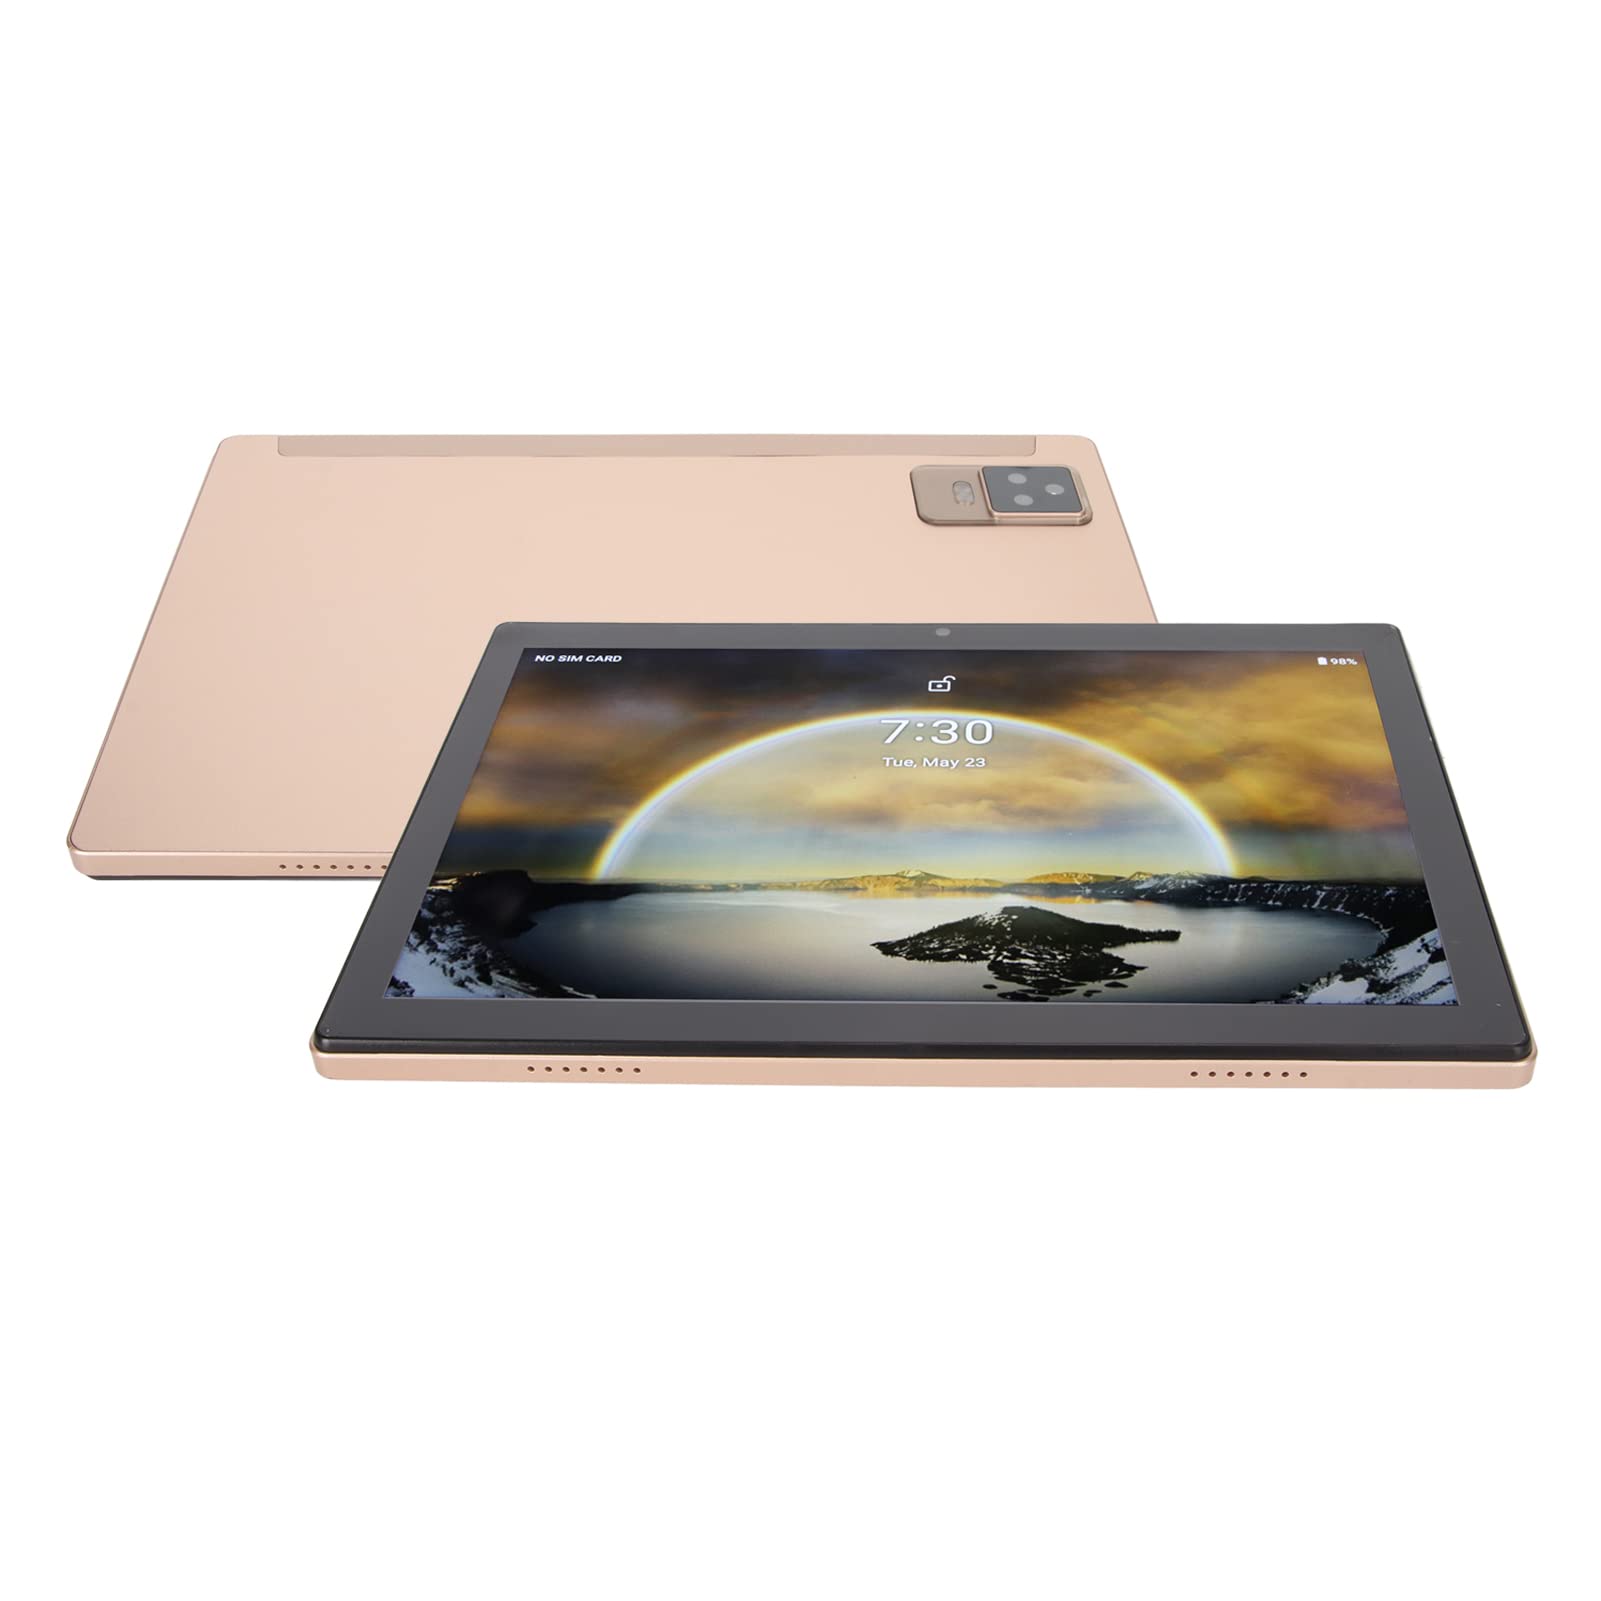 10.1 Inch Tablet Android 12 Tablet, Android Gaming Tablet, Octa Core Processor, 6GB RAM 256GB ROM, FHD Touchscreen, 8MP+16MP Dual Camera, 2.4G/5G WiFi, BT5.0, 7000mAh Battery (Gold)